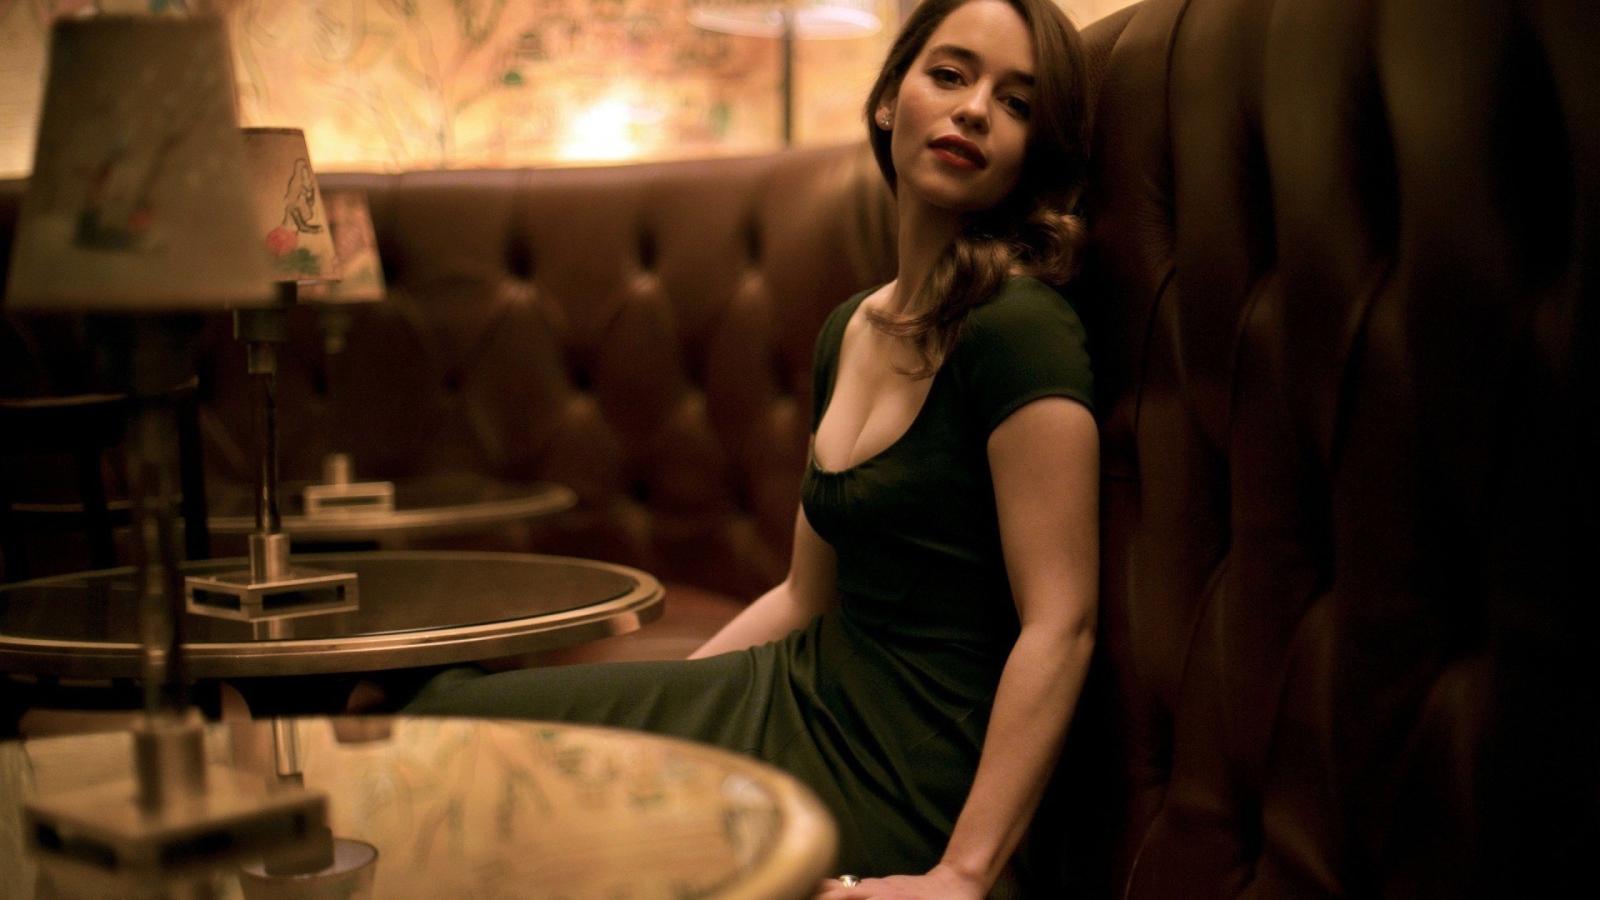 The girl in a green dress sitting on the couch